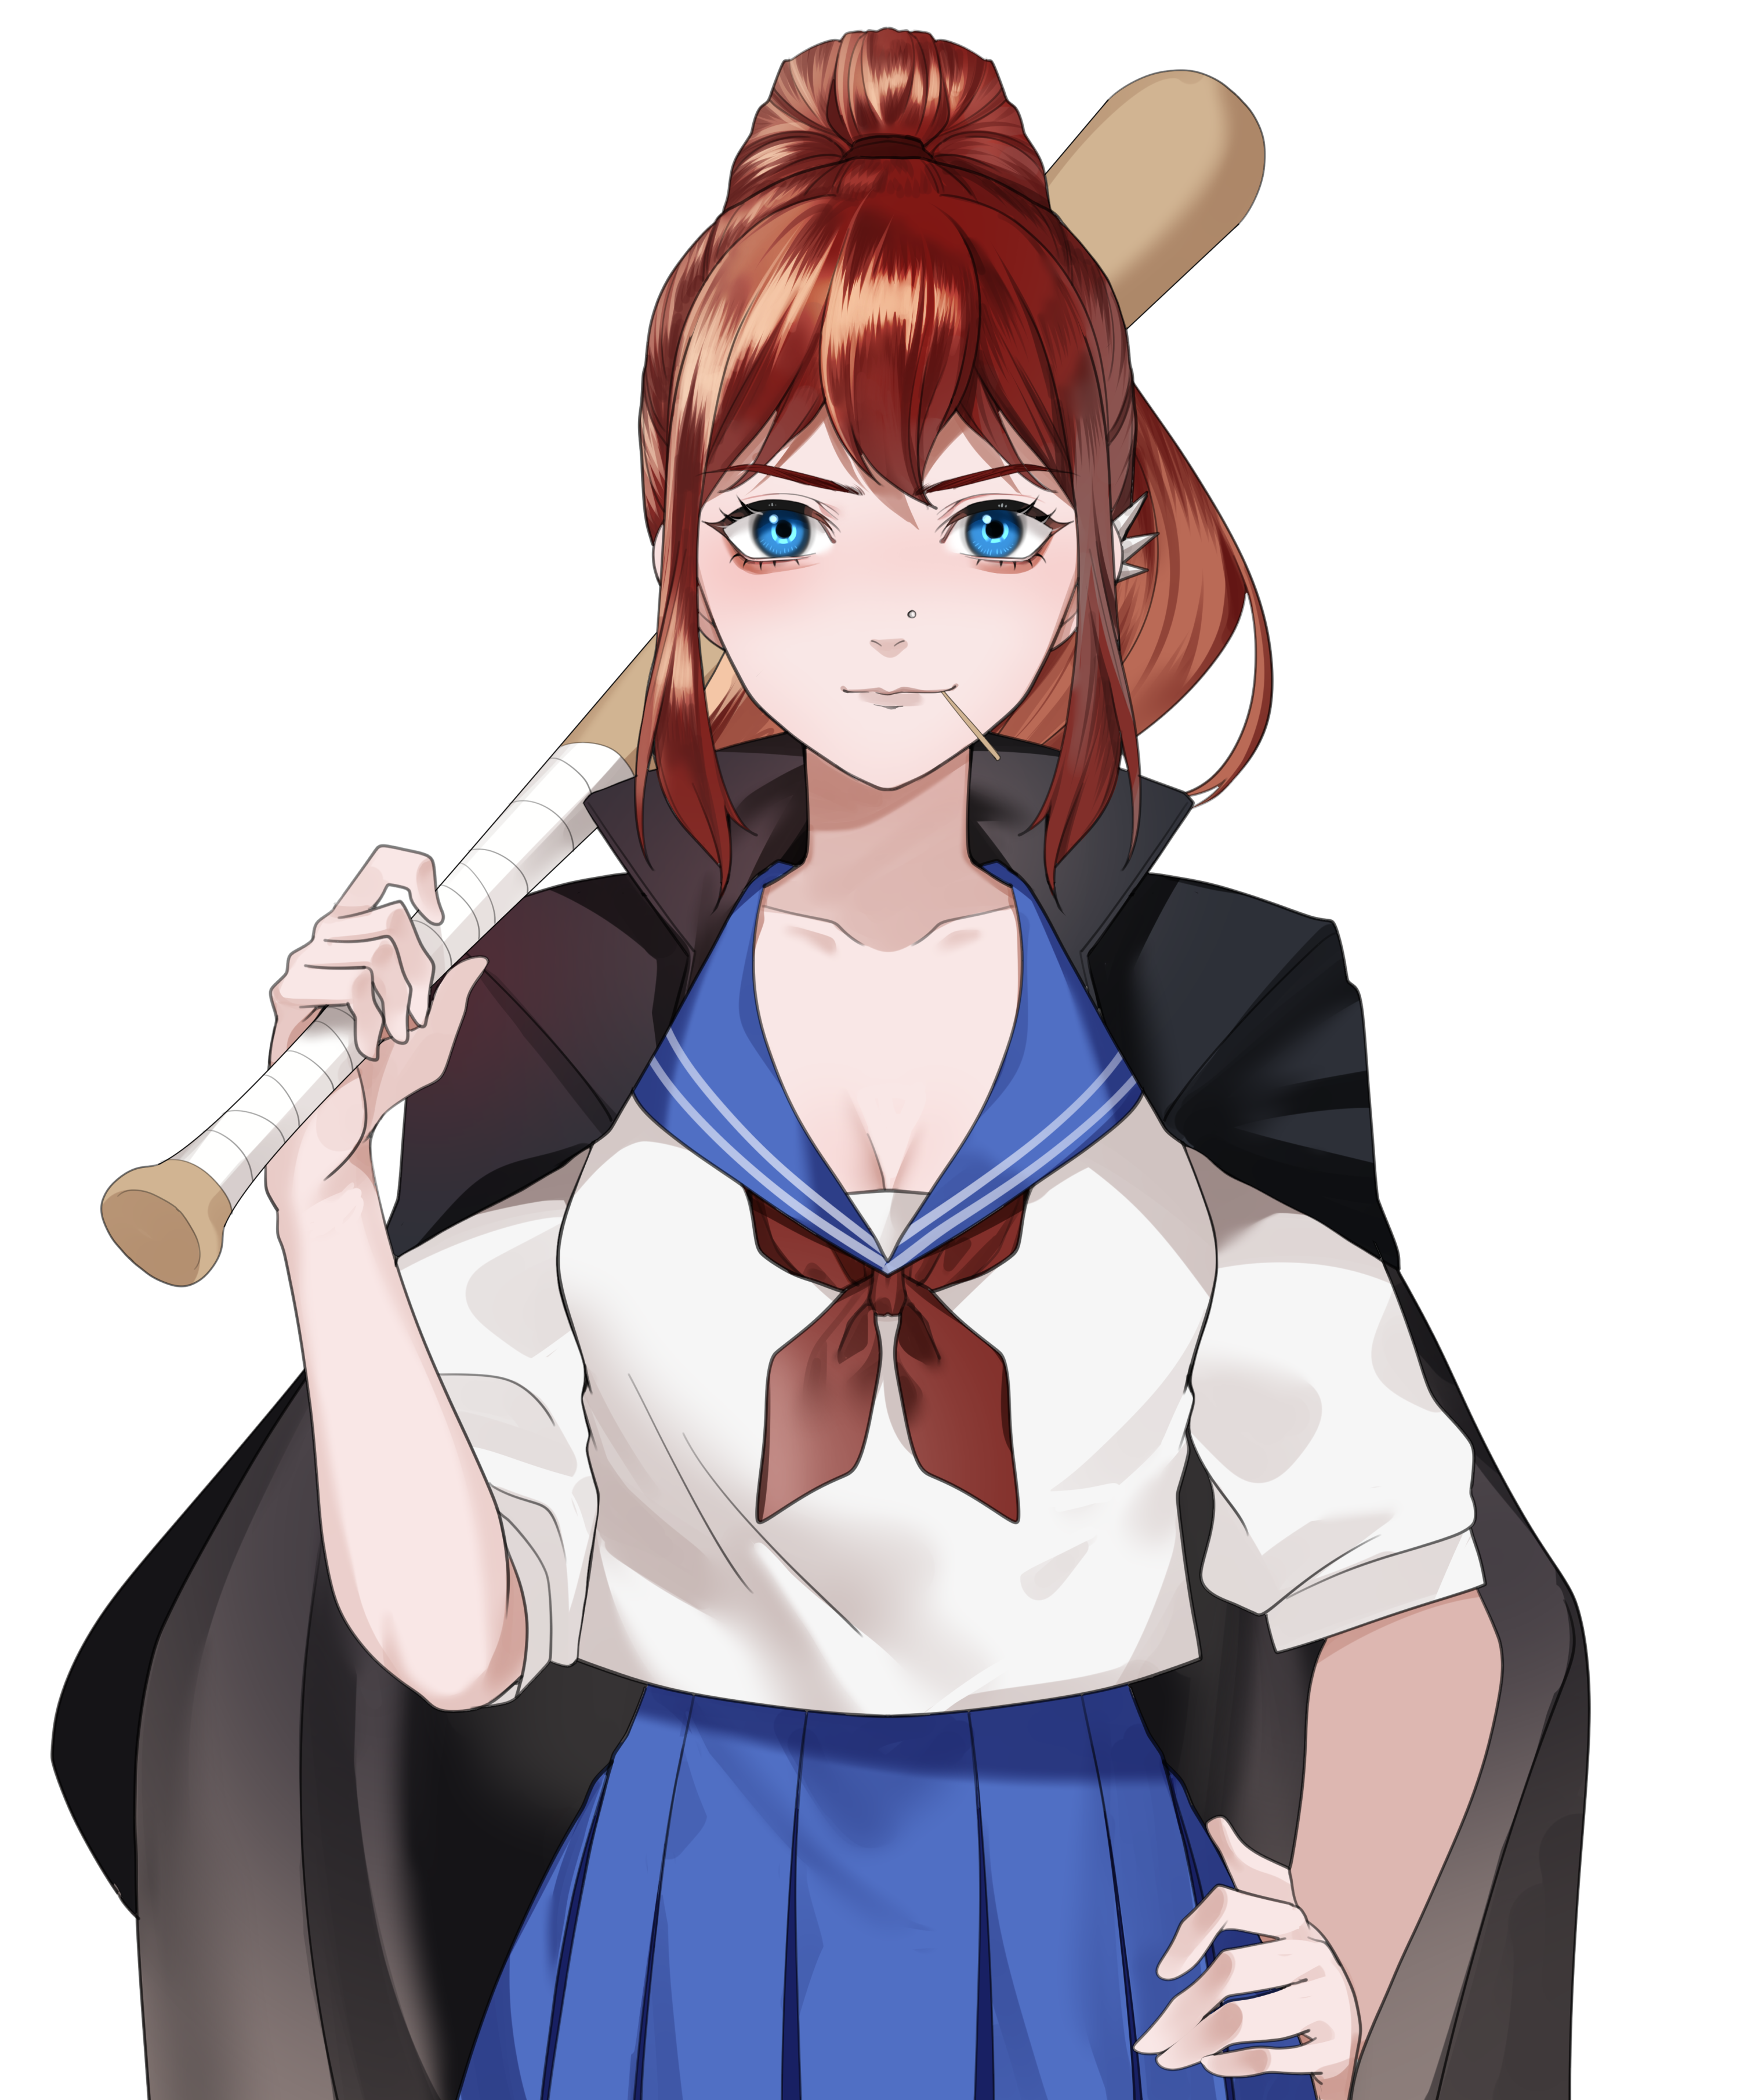 An image of the character Victoria from the visual novel The Many Deaths of Lily Kosen